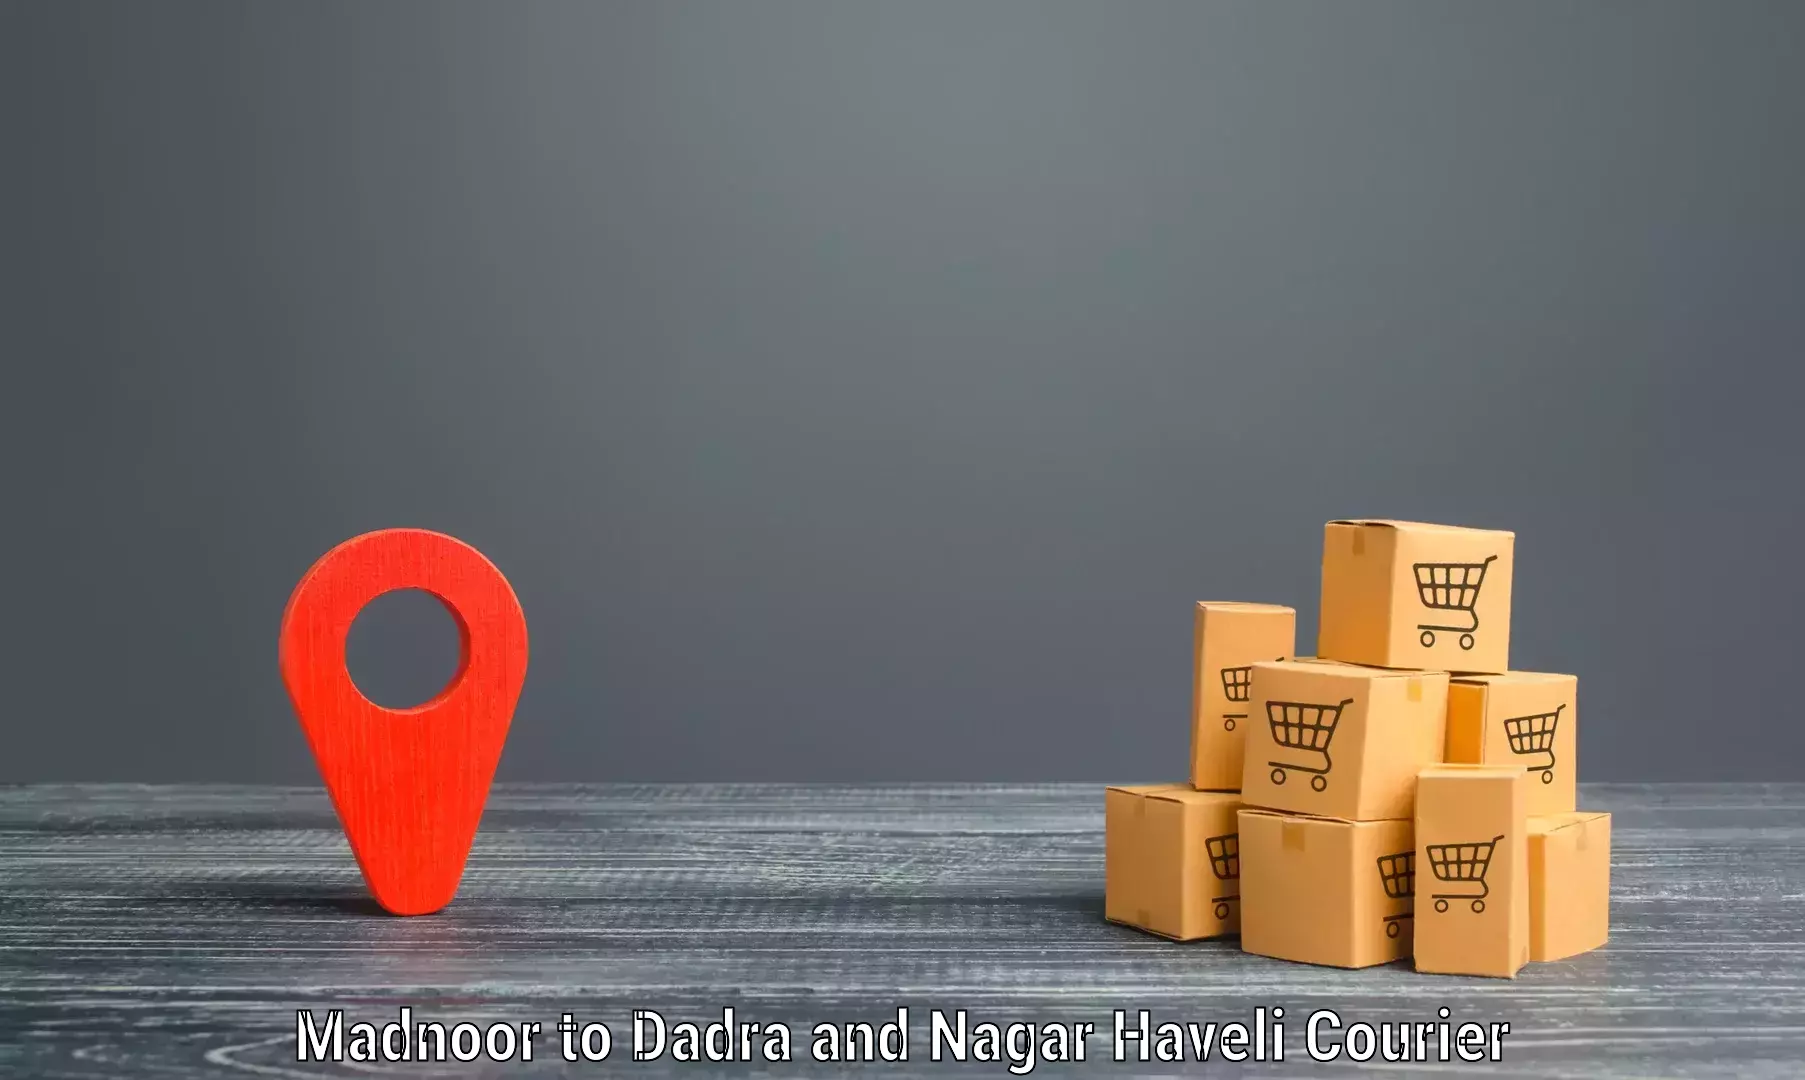 Quality courier partnerships Madnoor to Dadra and Nagar Haveli